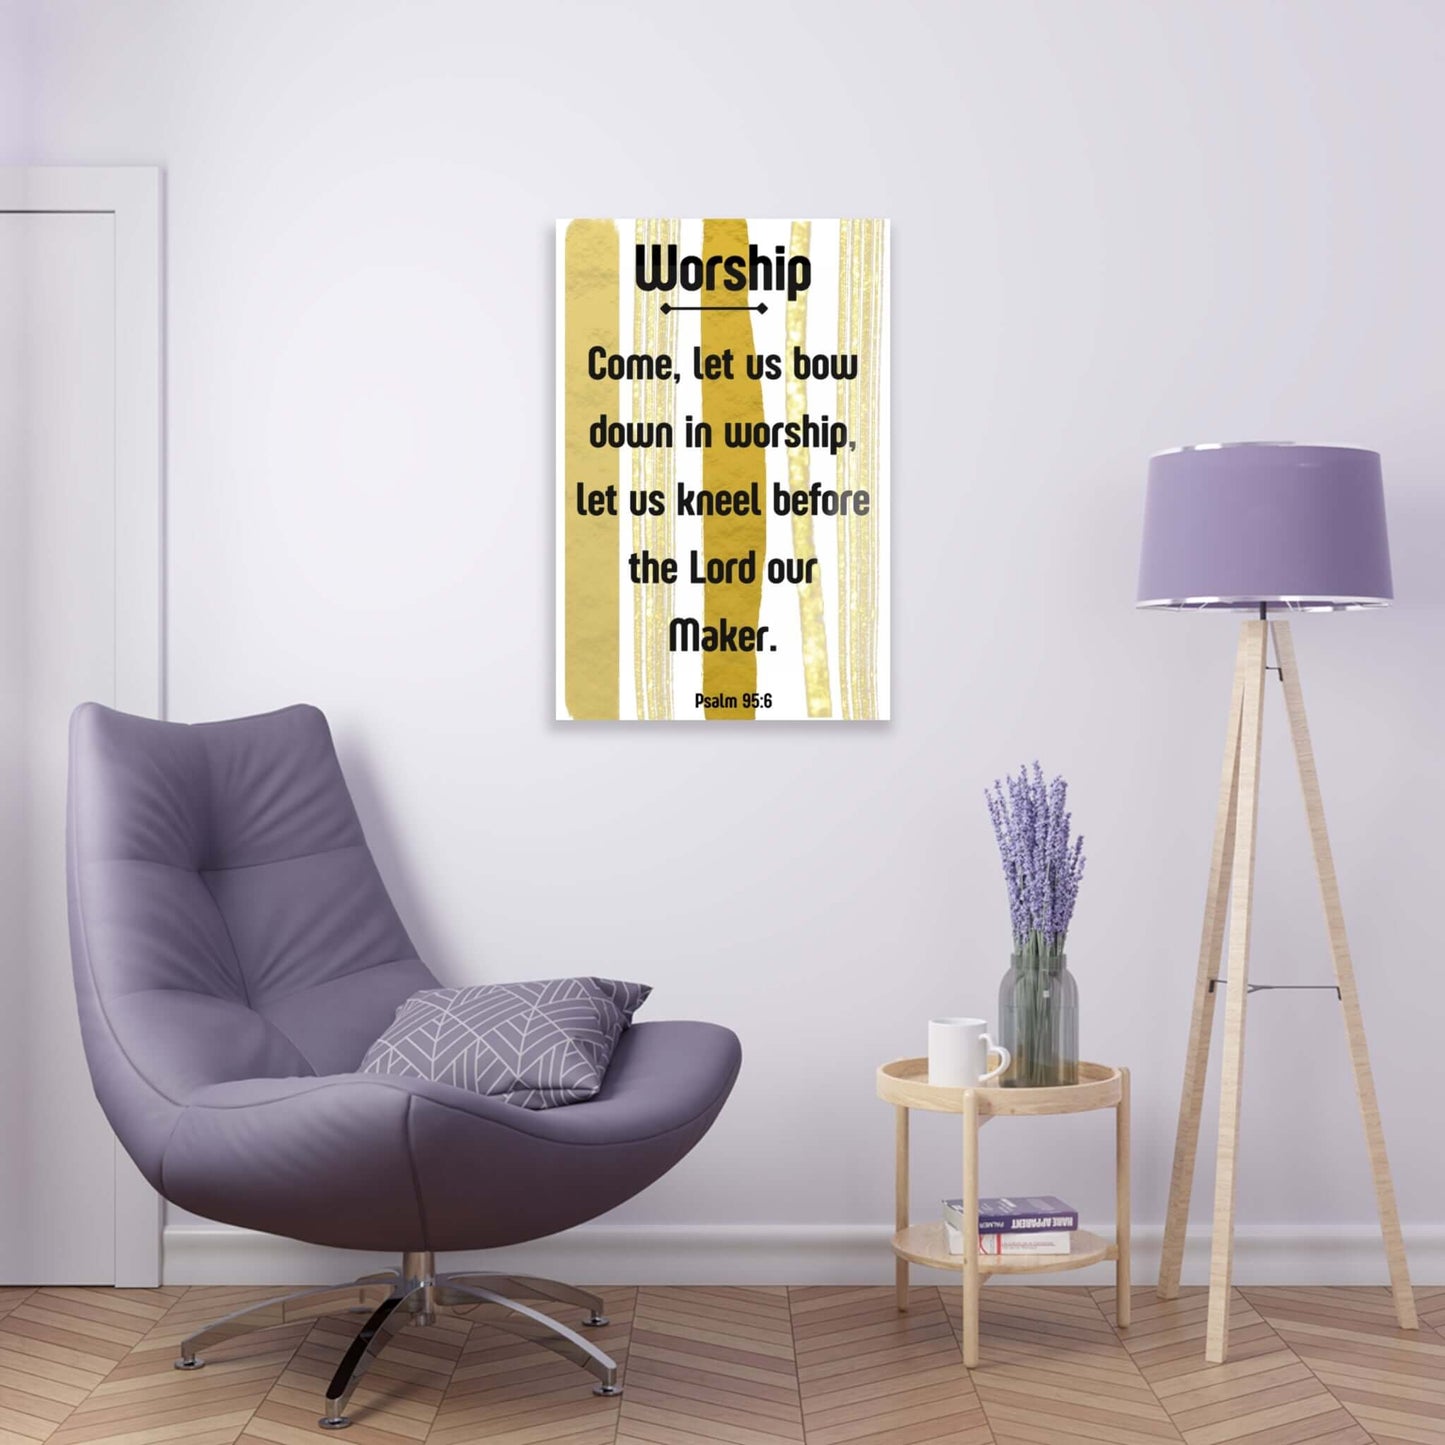 Wall Decor for Dining Room: Elegant Acrylic Print with Scripture | Art & Wall Decor,Assembled in the USA,Assembled in USA,Decor,Home & Living,Home Decor,Indoor,Made in the USA,Made in USA,Poster